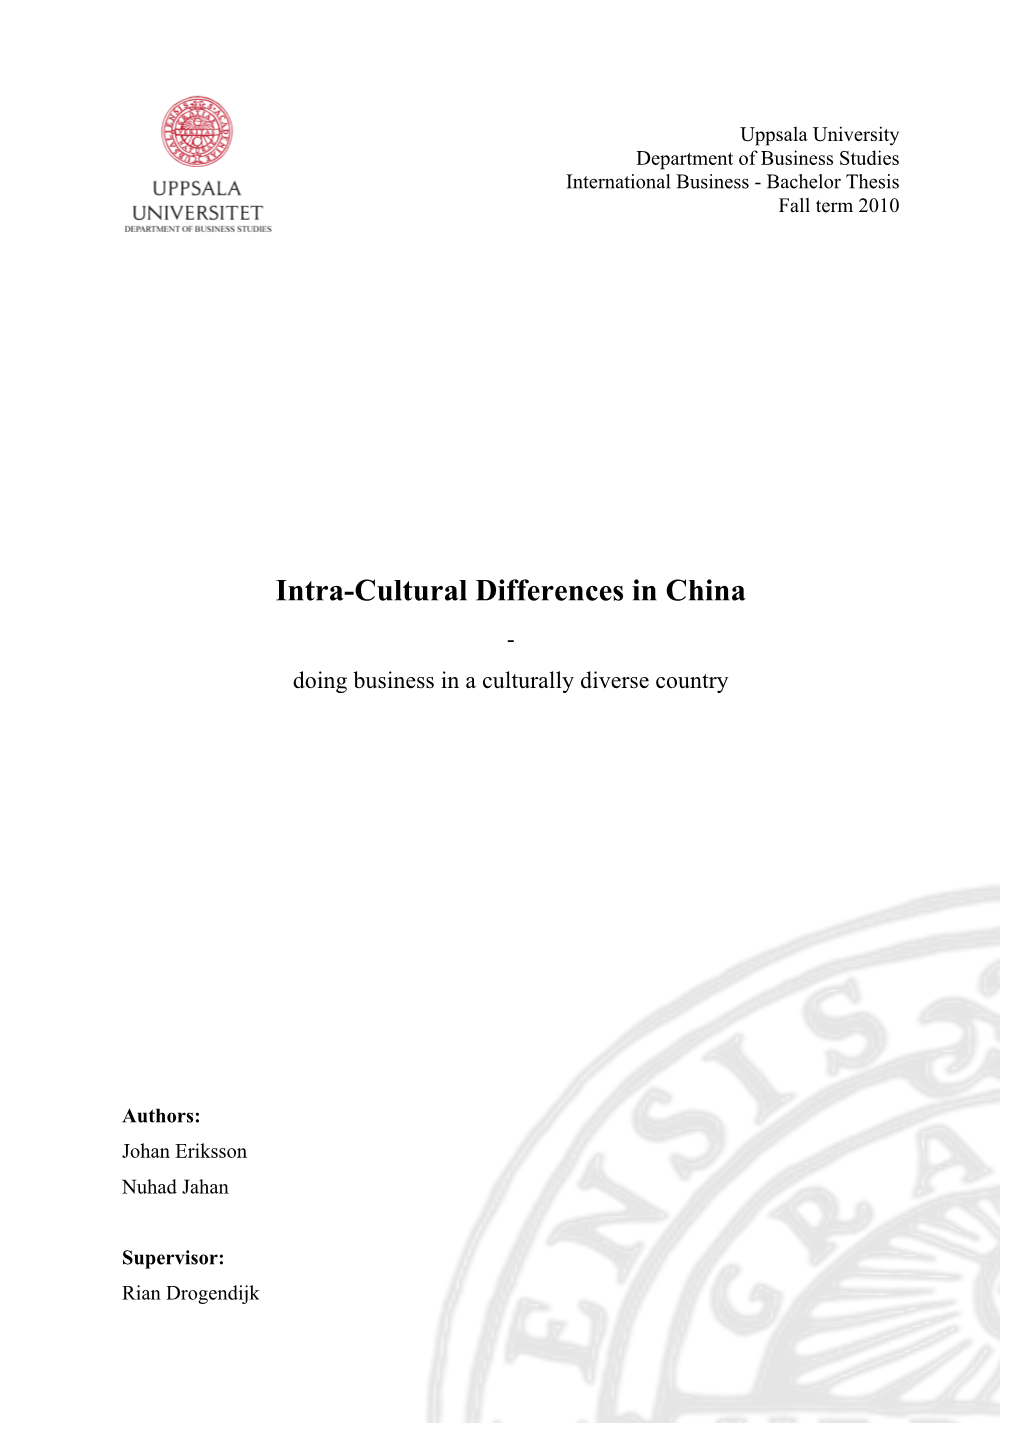 Intra-Cultural Differences in China - Doing Business in a Culturally Diverse Country